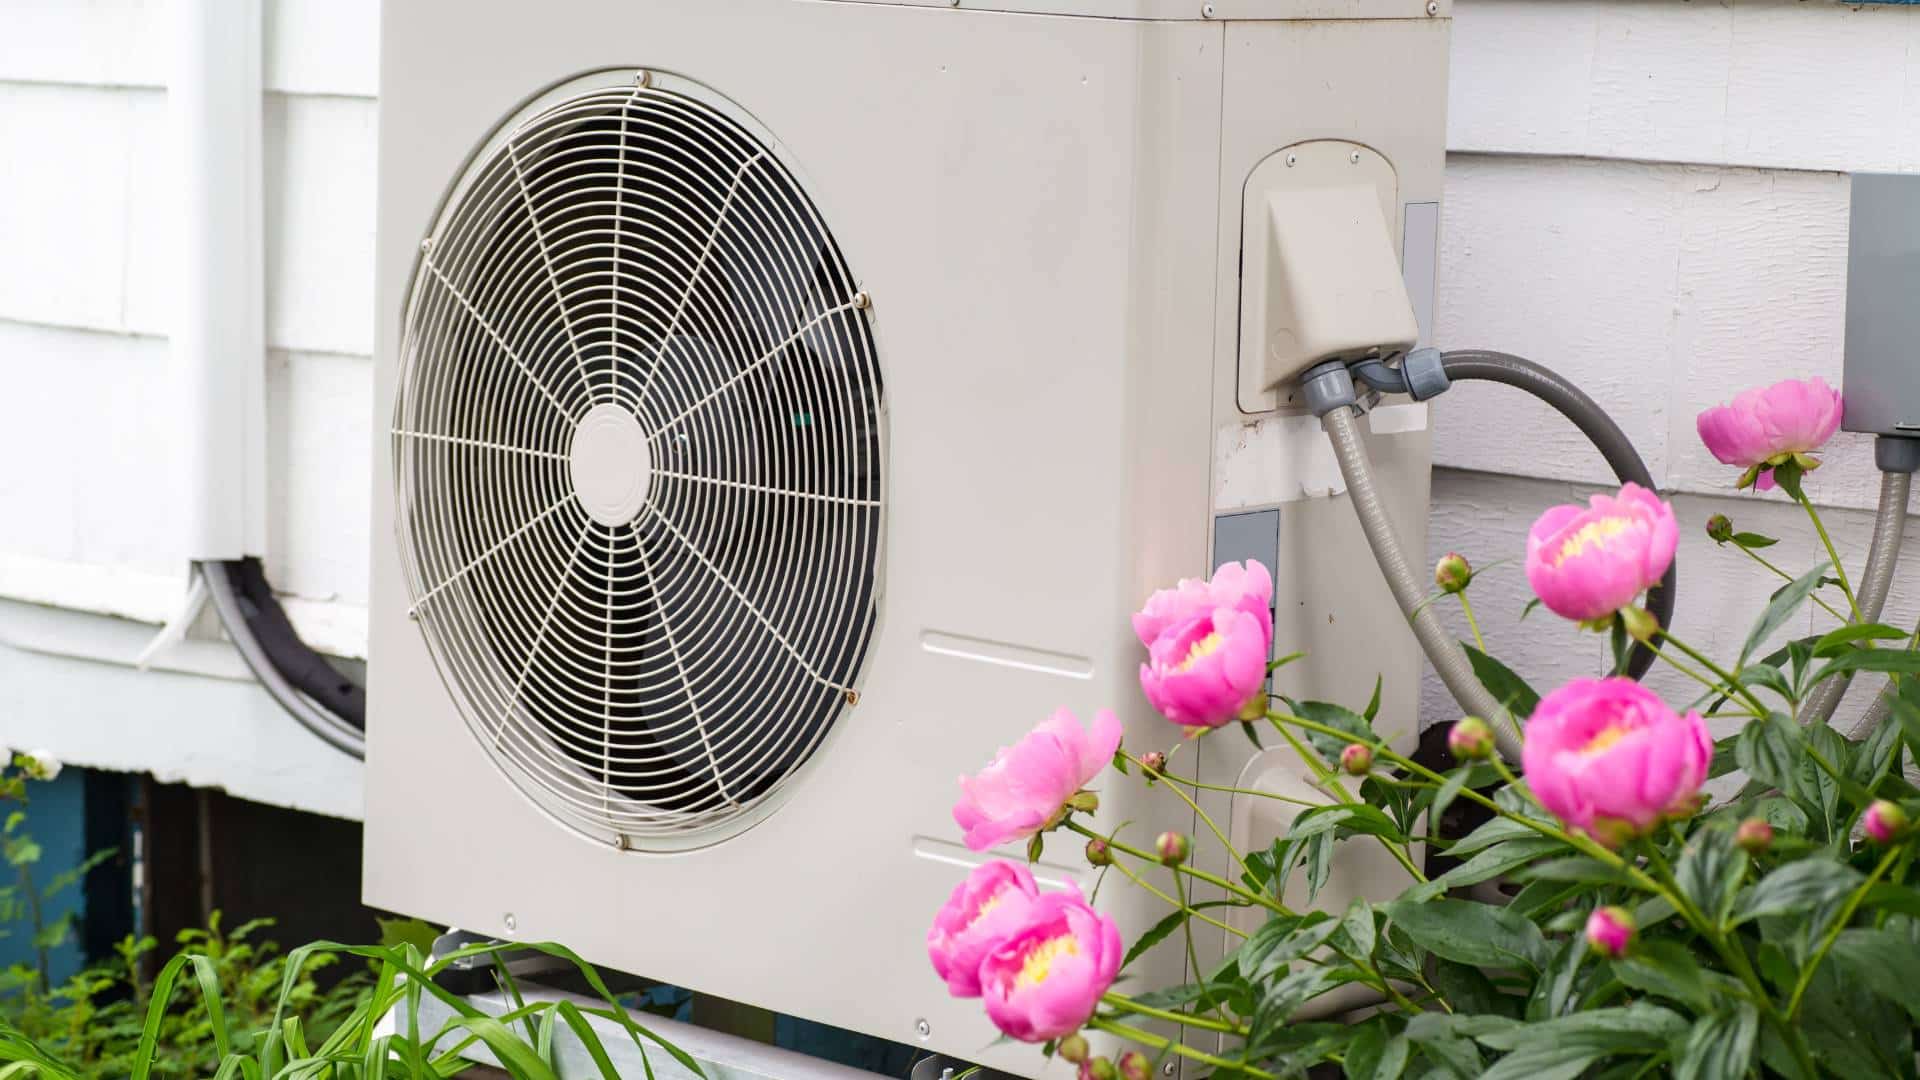 Flowers grow next to a heat pump at a residential house.  